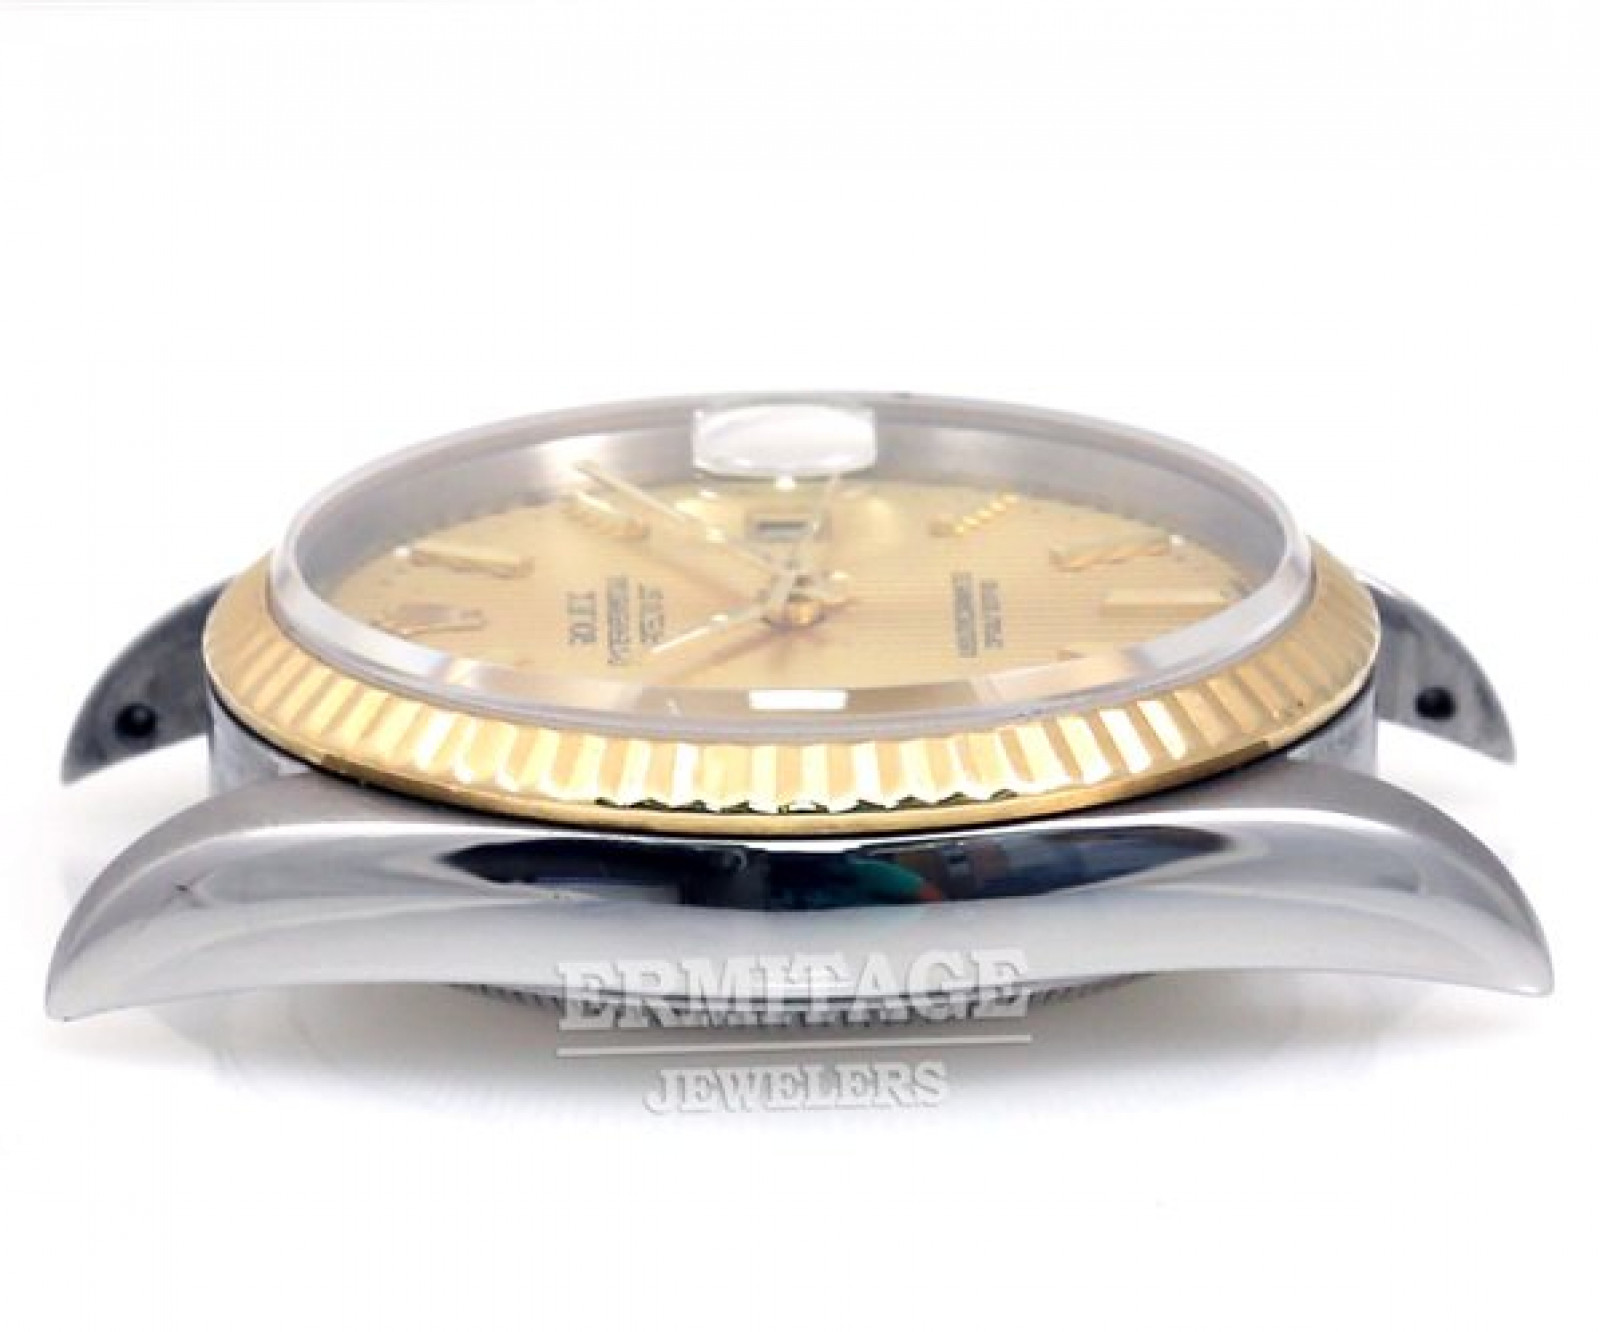 Pre-Owned Rolex Datejust 16233 Gold & Steel